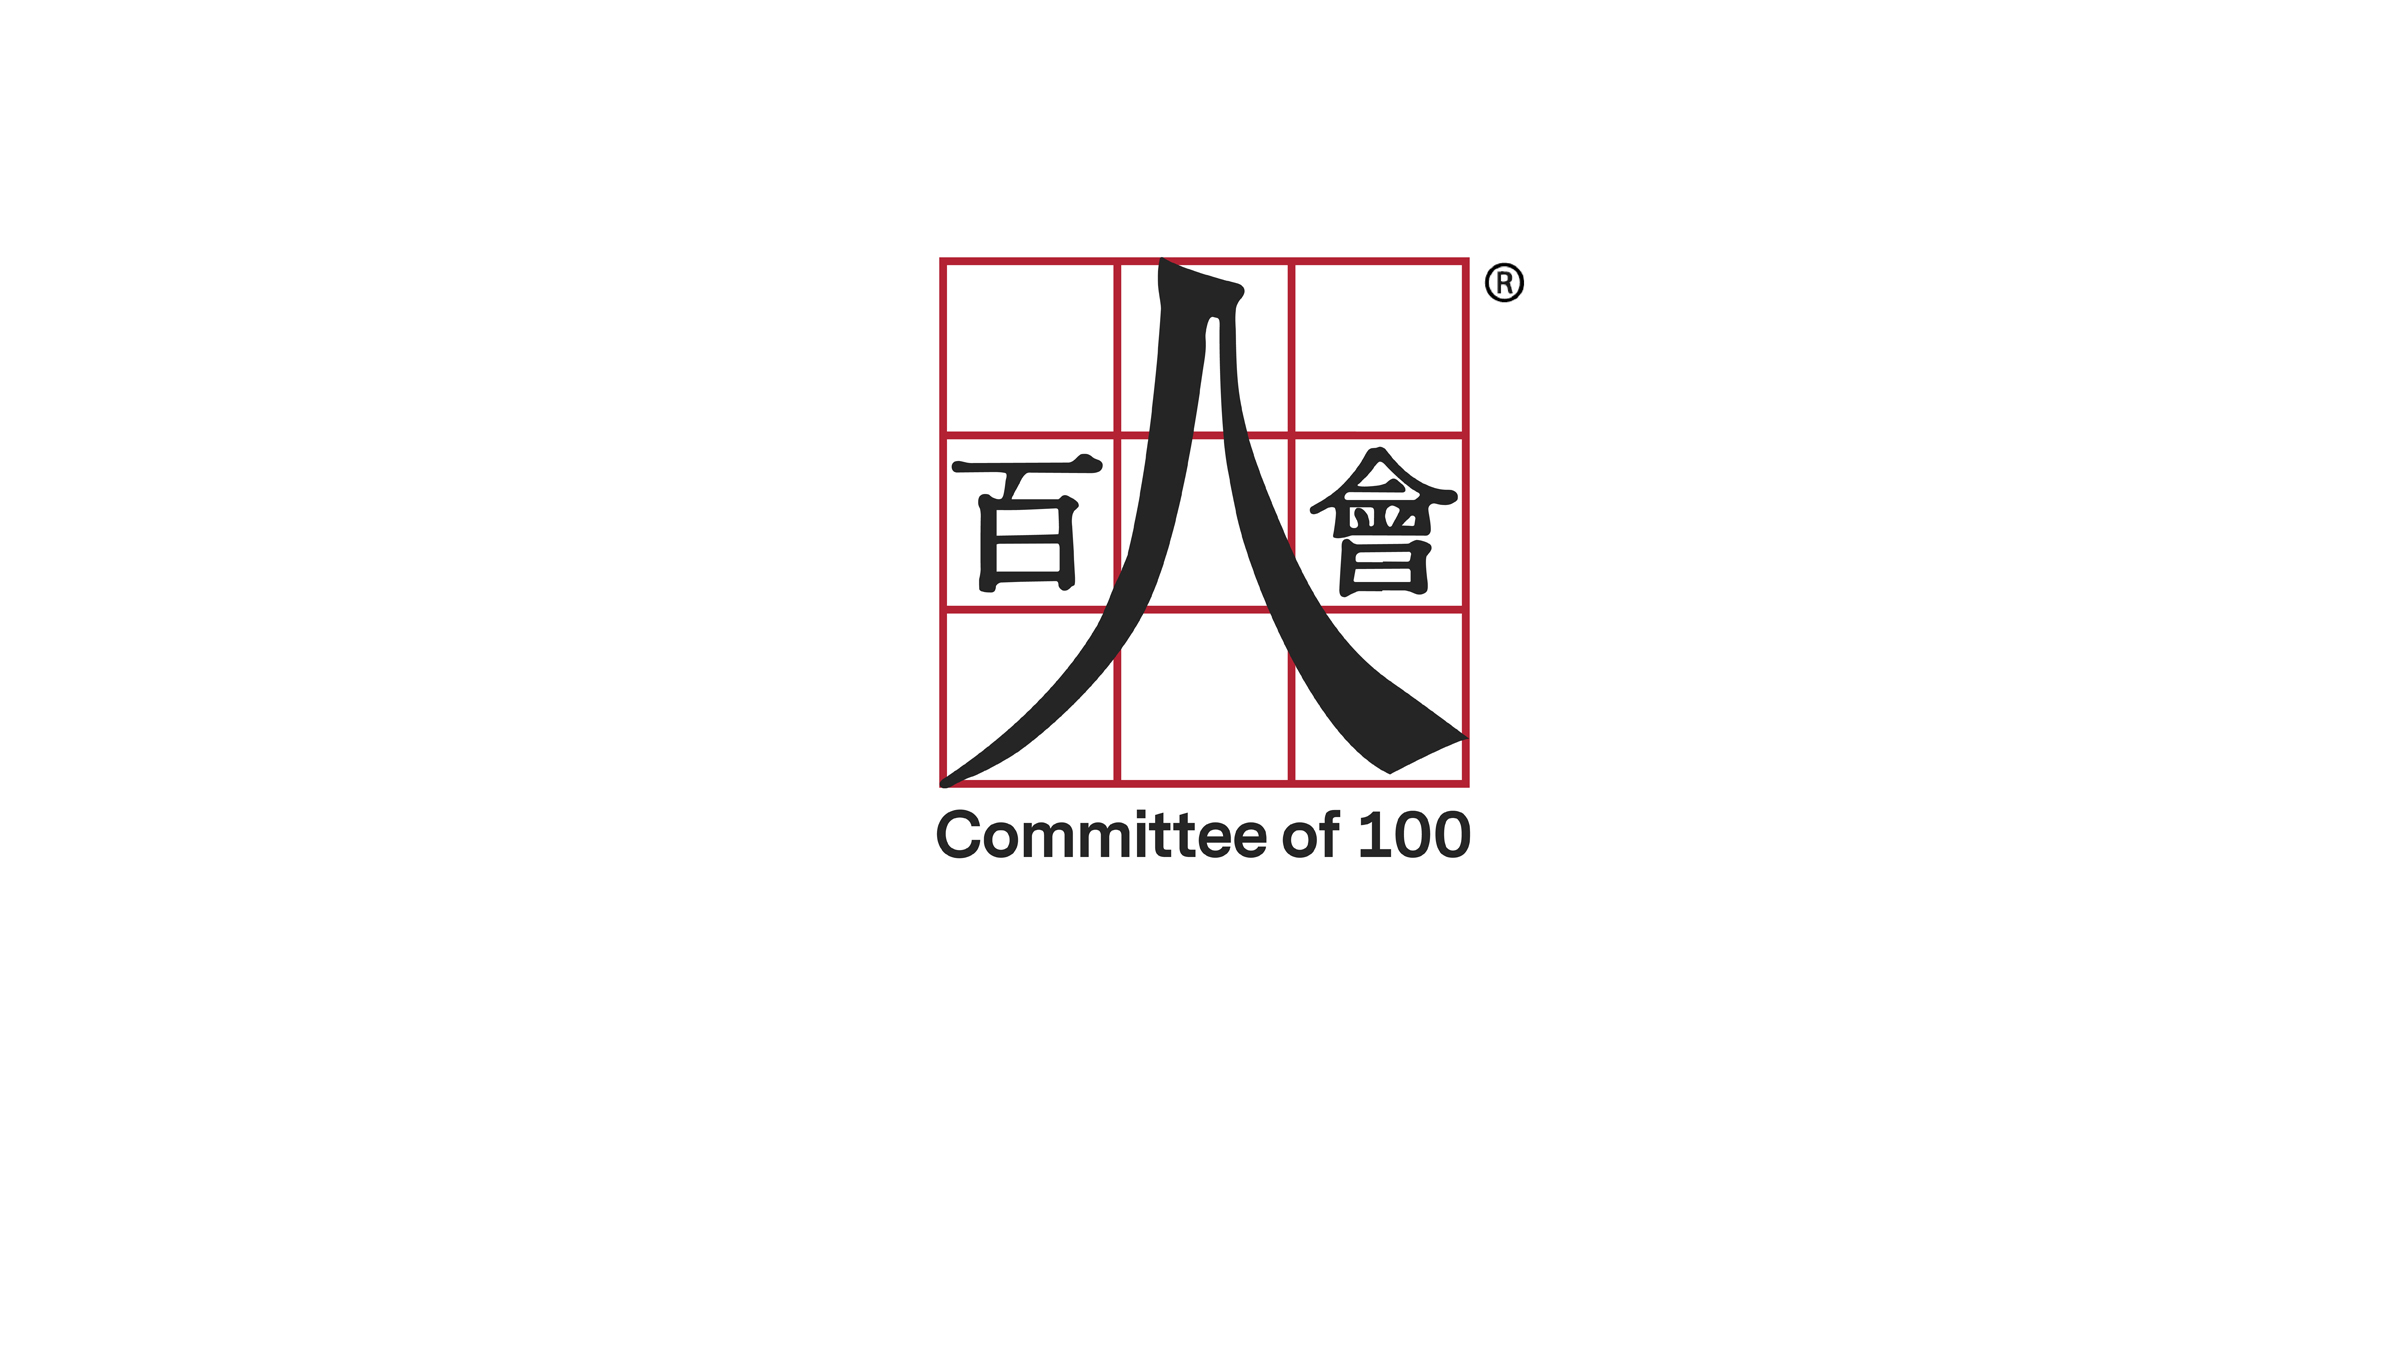 Committee of 100 Partners with Corporate Board Member to “Move the Needle” on Corporate Board Diversity